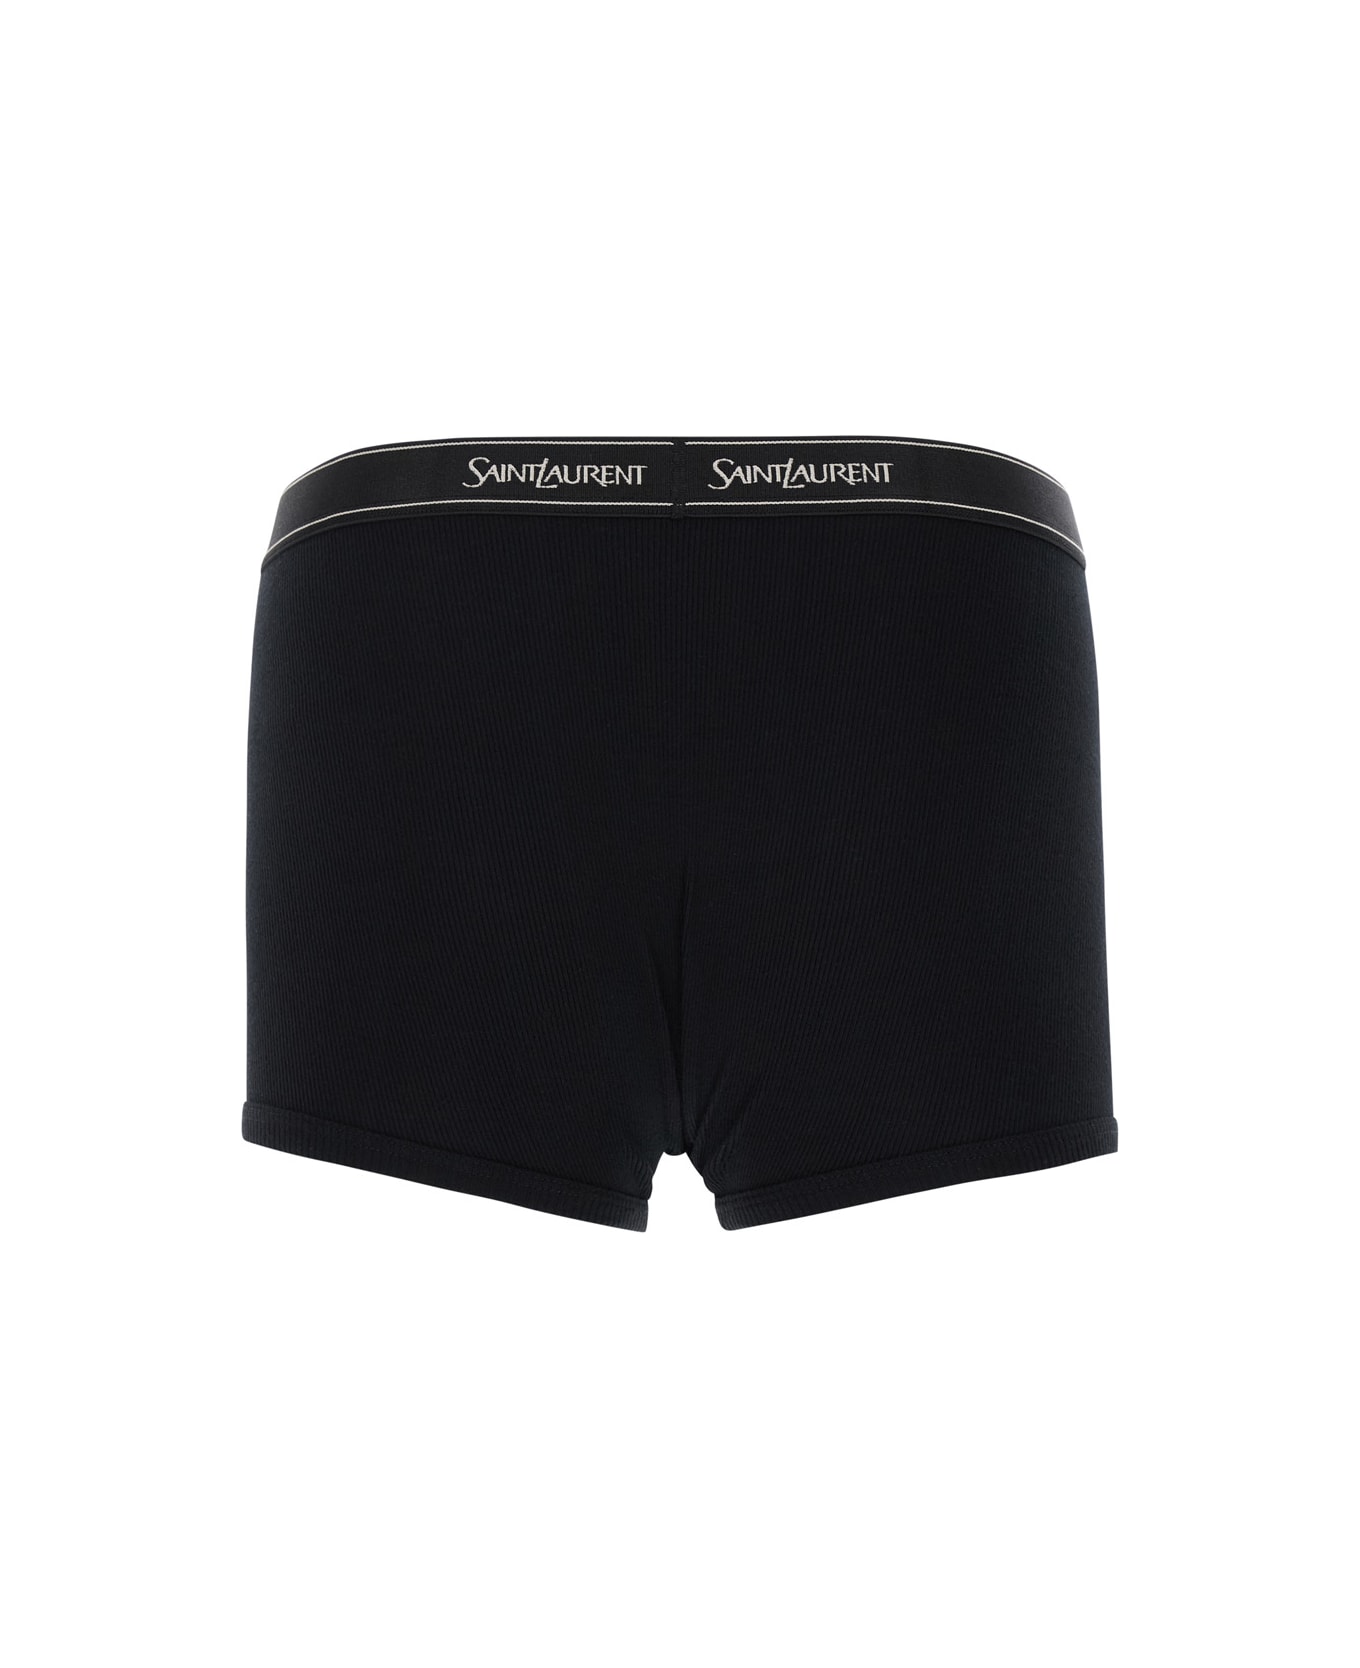 Saint Laurent Black Boxer Briefs With Logo Lettering Embroidery In Ribbed Cotton Man - NOIR